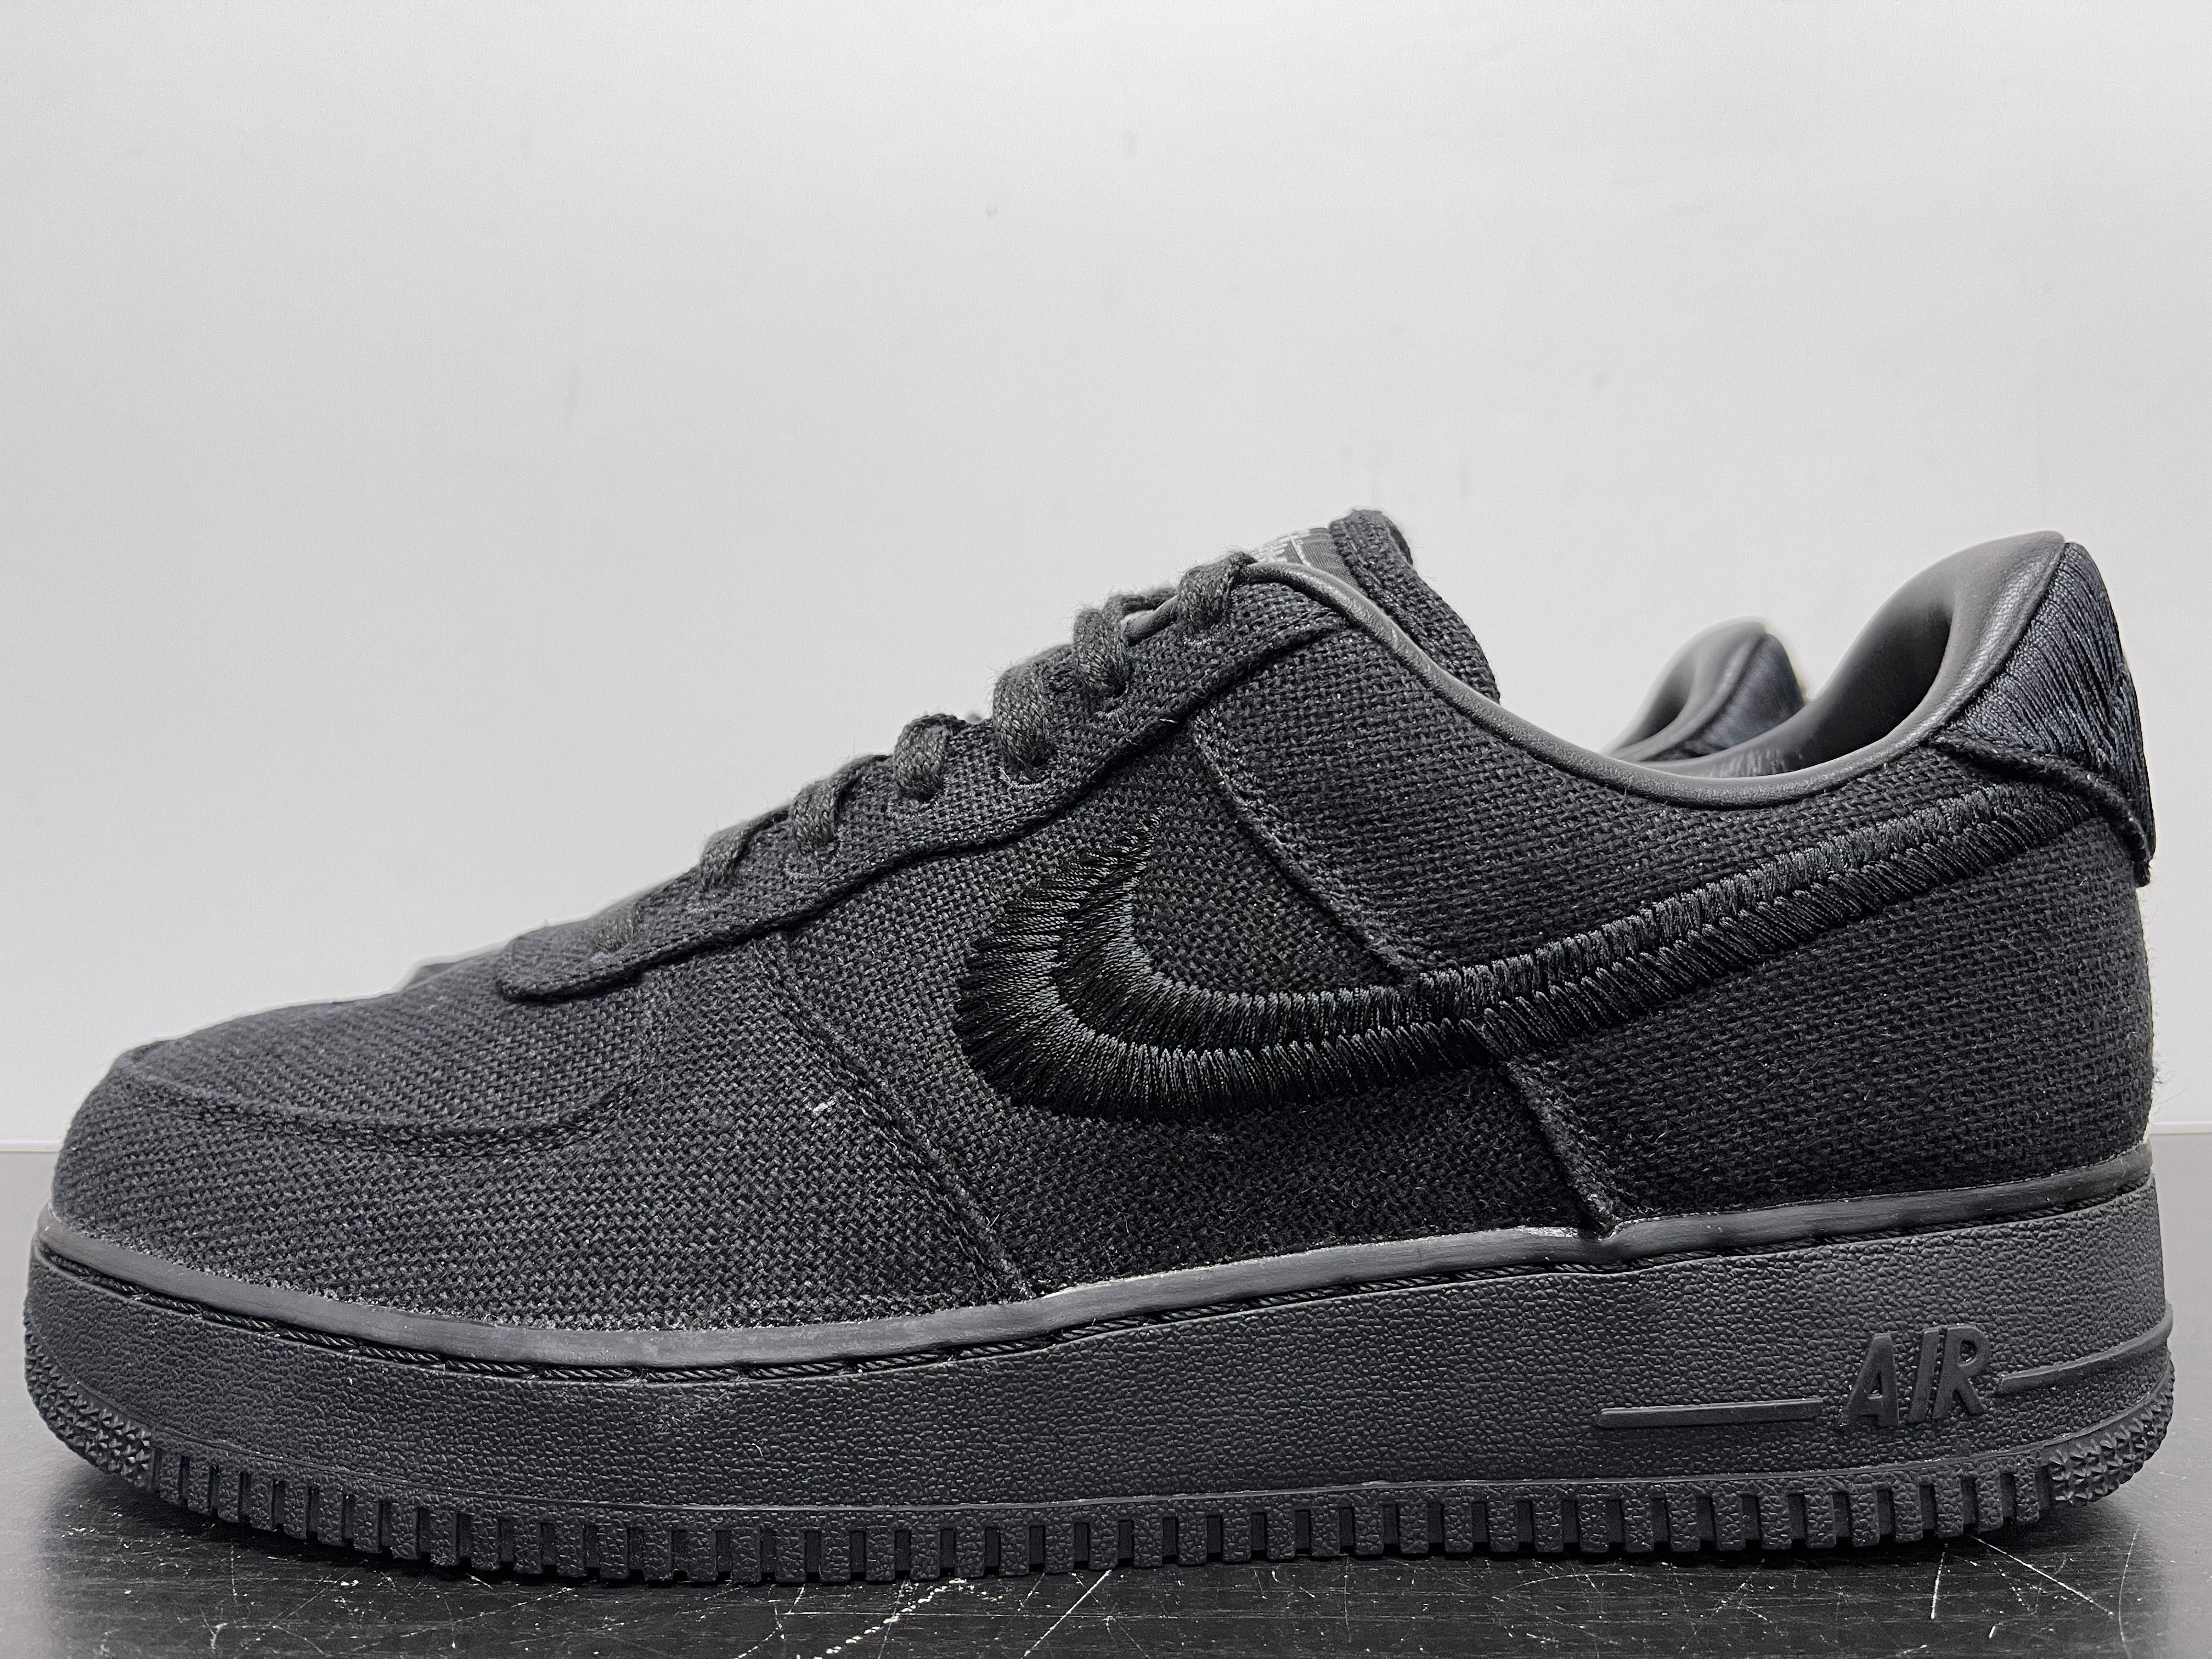 Stussy x Nike Air Force 1 Low Black CZ9084-001 Release Date